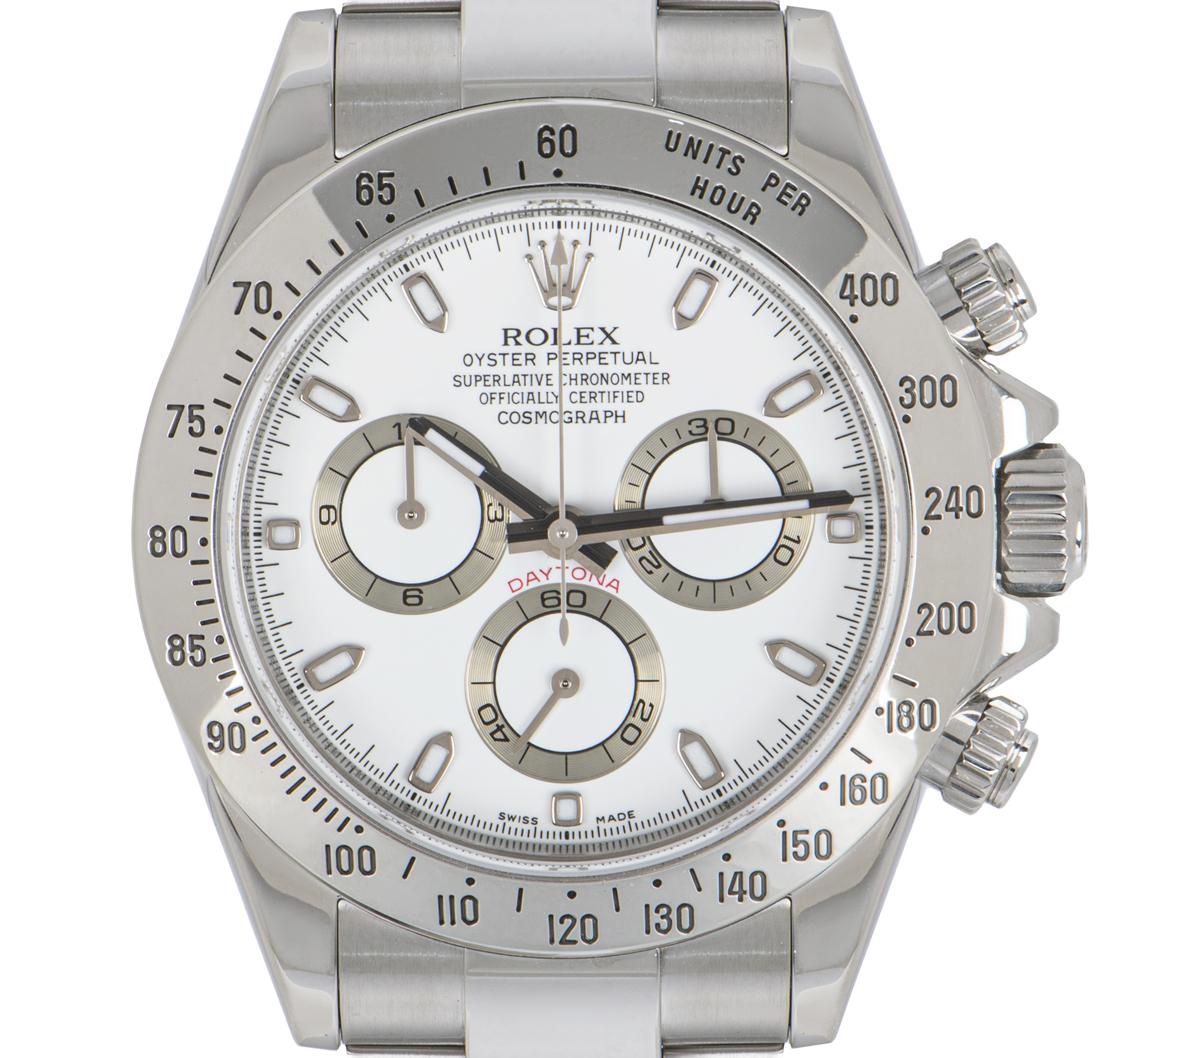 An unworn NOS Daytona in Oystersteel by Rolex, featuring a white dial. With an engraved tachymetric scale, three counters and pushers; the Daytona was designed to be the ultimate timing tool for endurance racing drivers.

The Oyster bracelet is